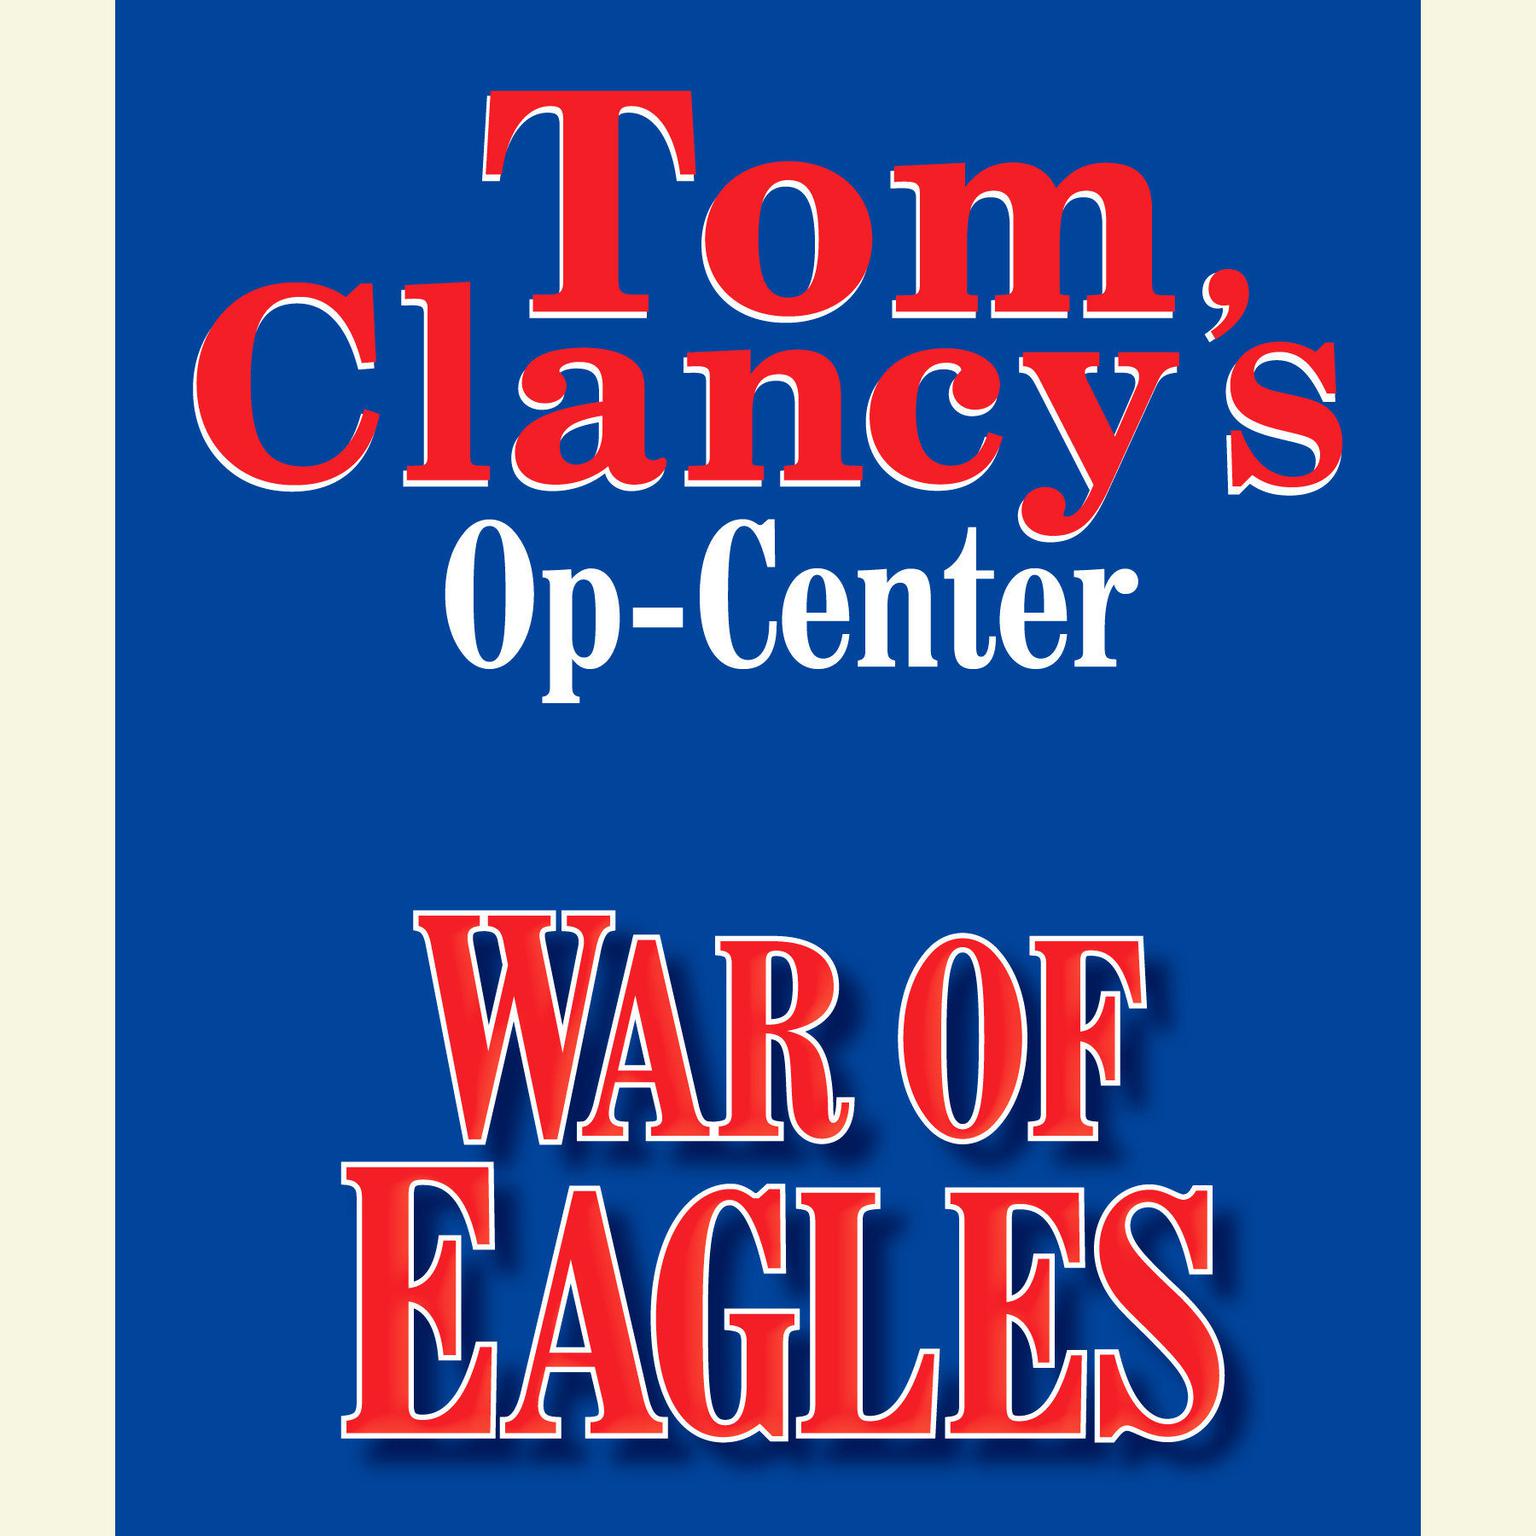 Tom Clancys Op-Center #12: War of Eagles Audiobook, by Jeff Rovin